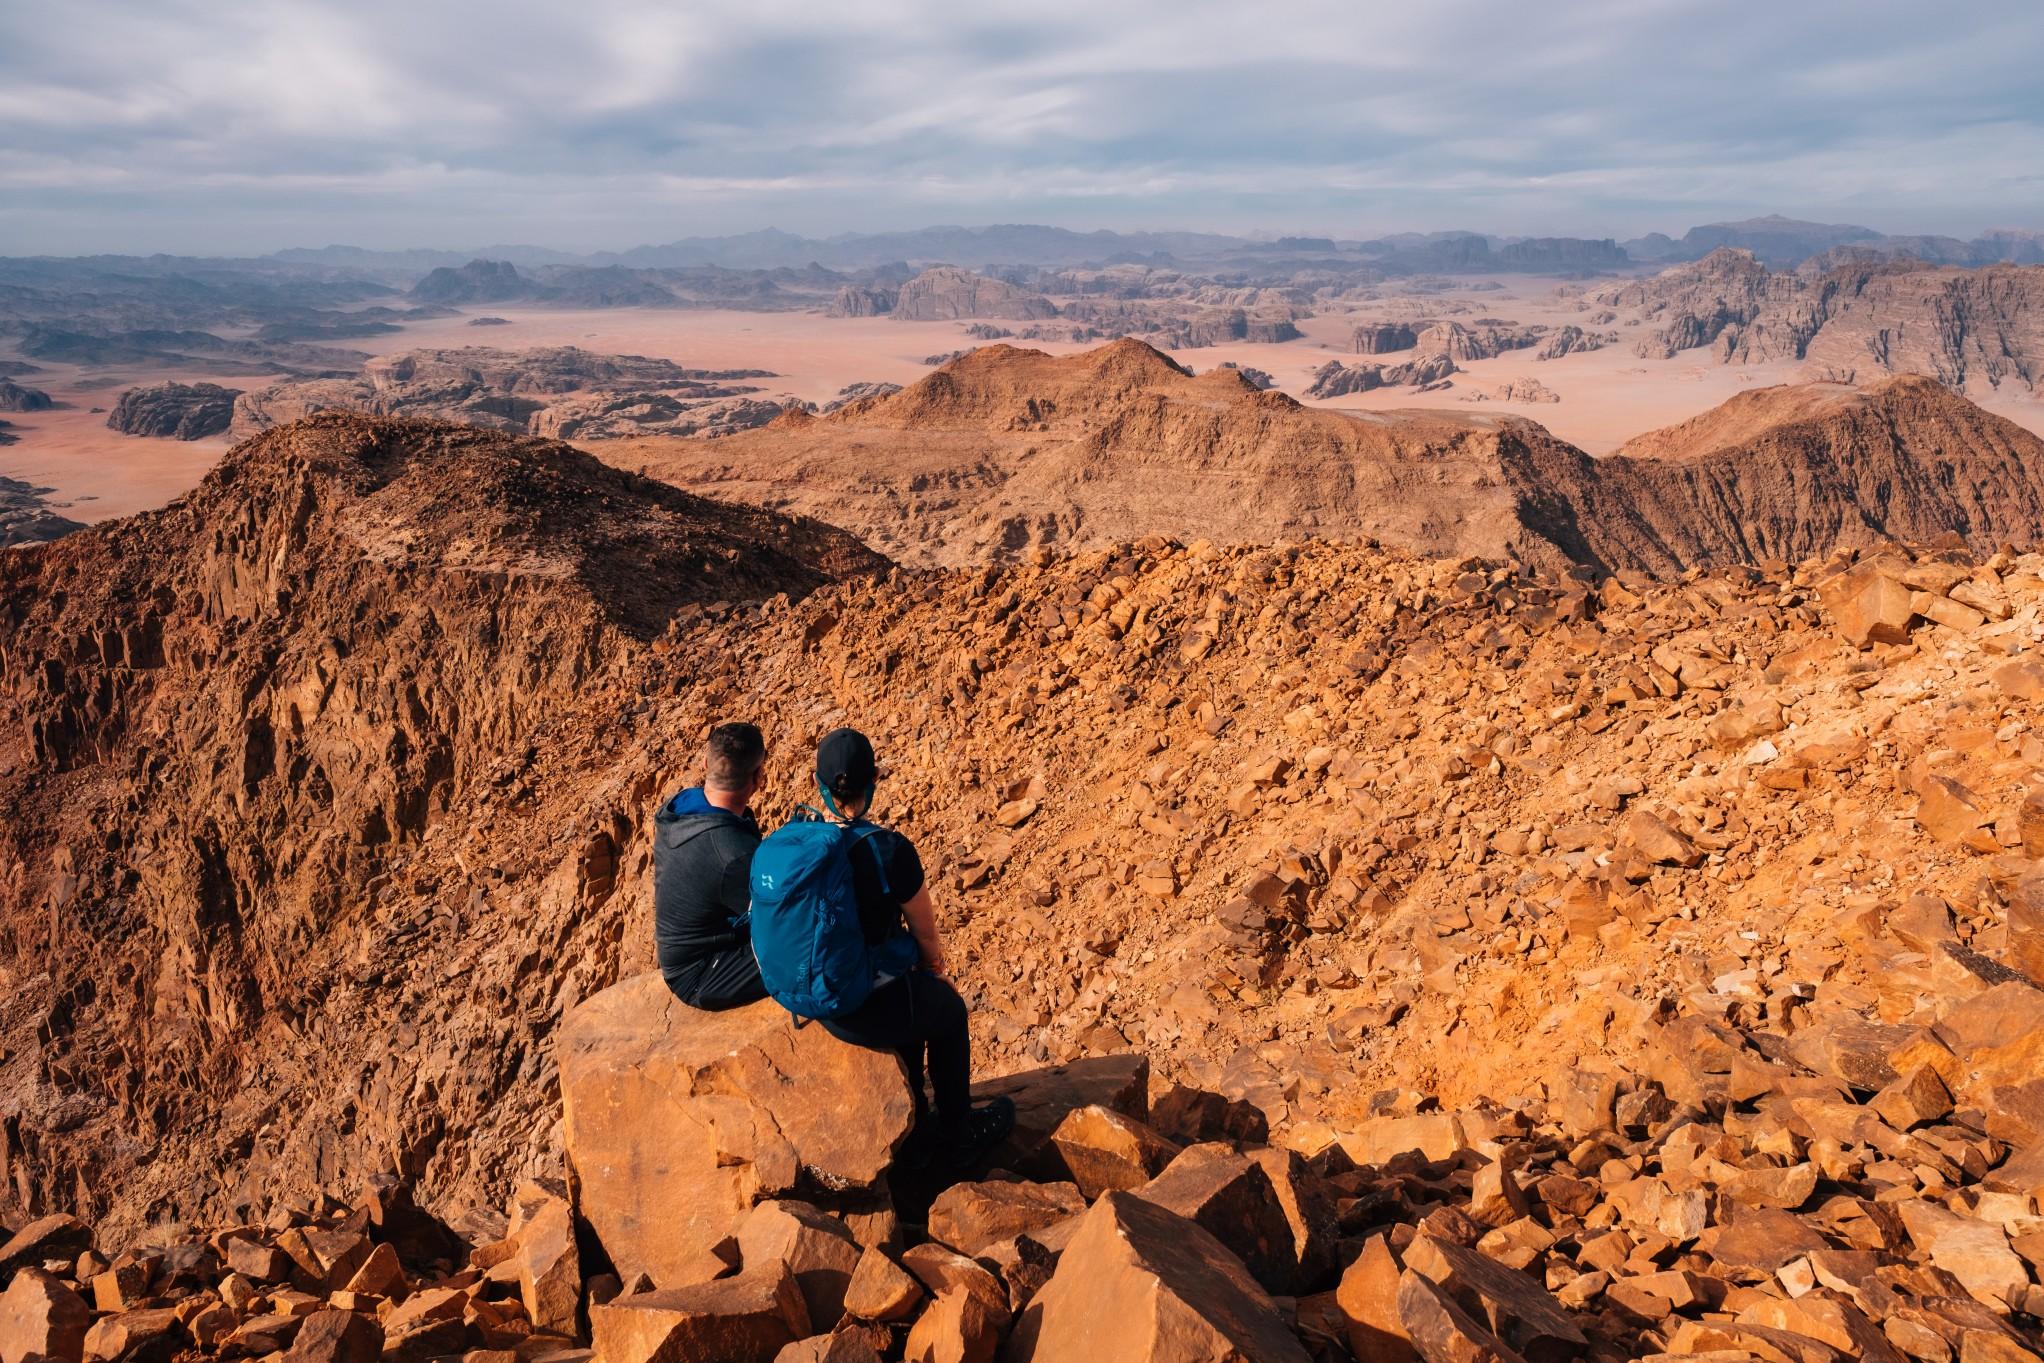 Hikers on the summit of Umm Ad Dami, the highest mountain in Jordan. Photo: Tom Barker.